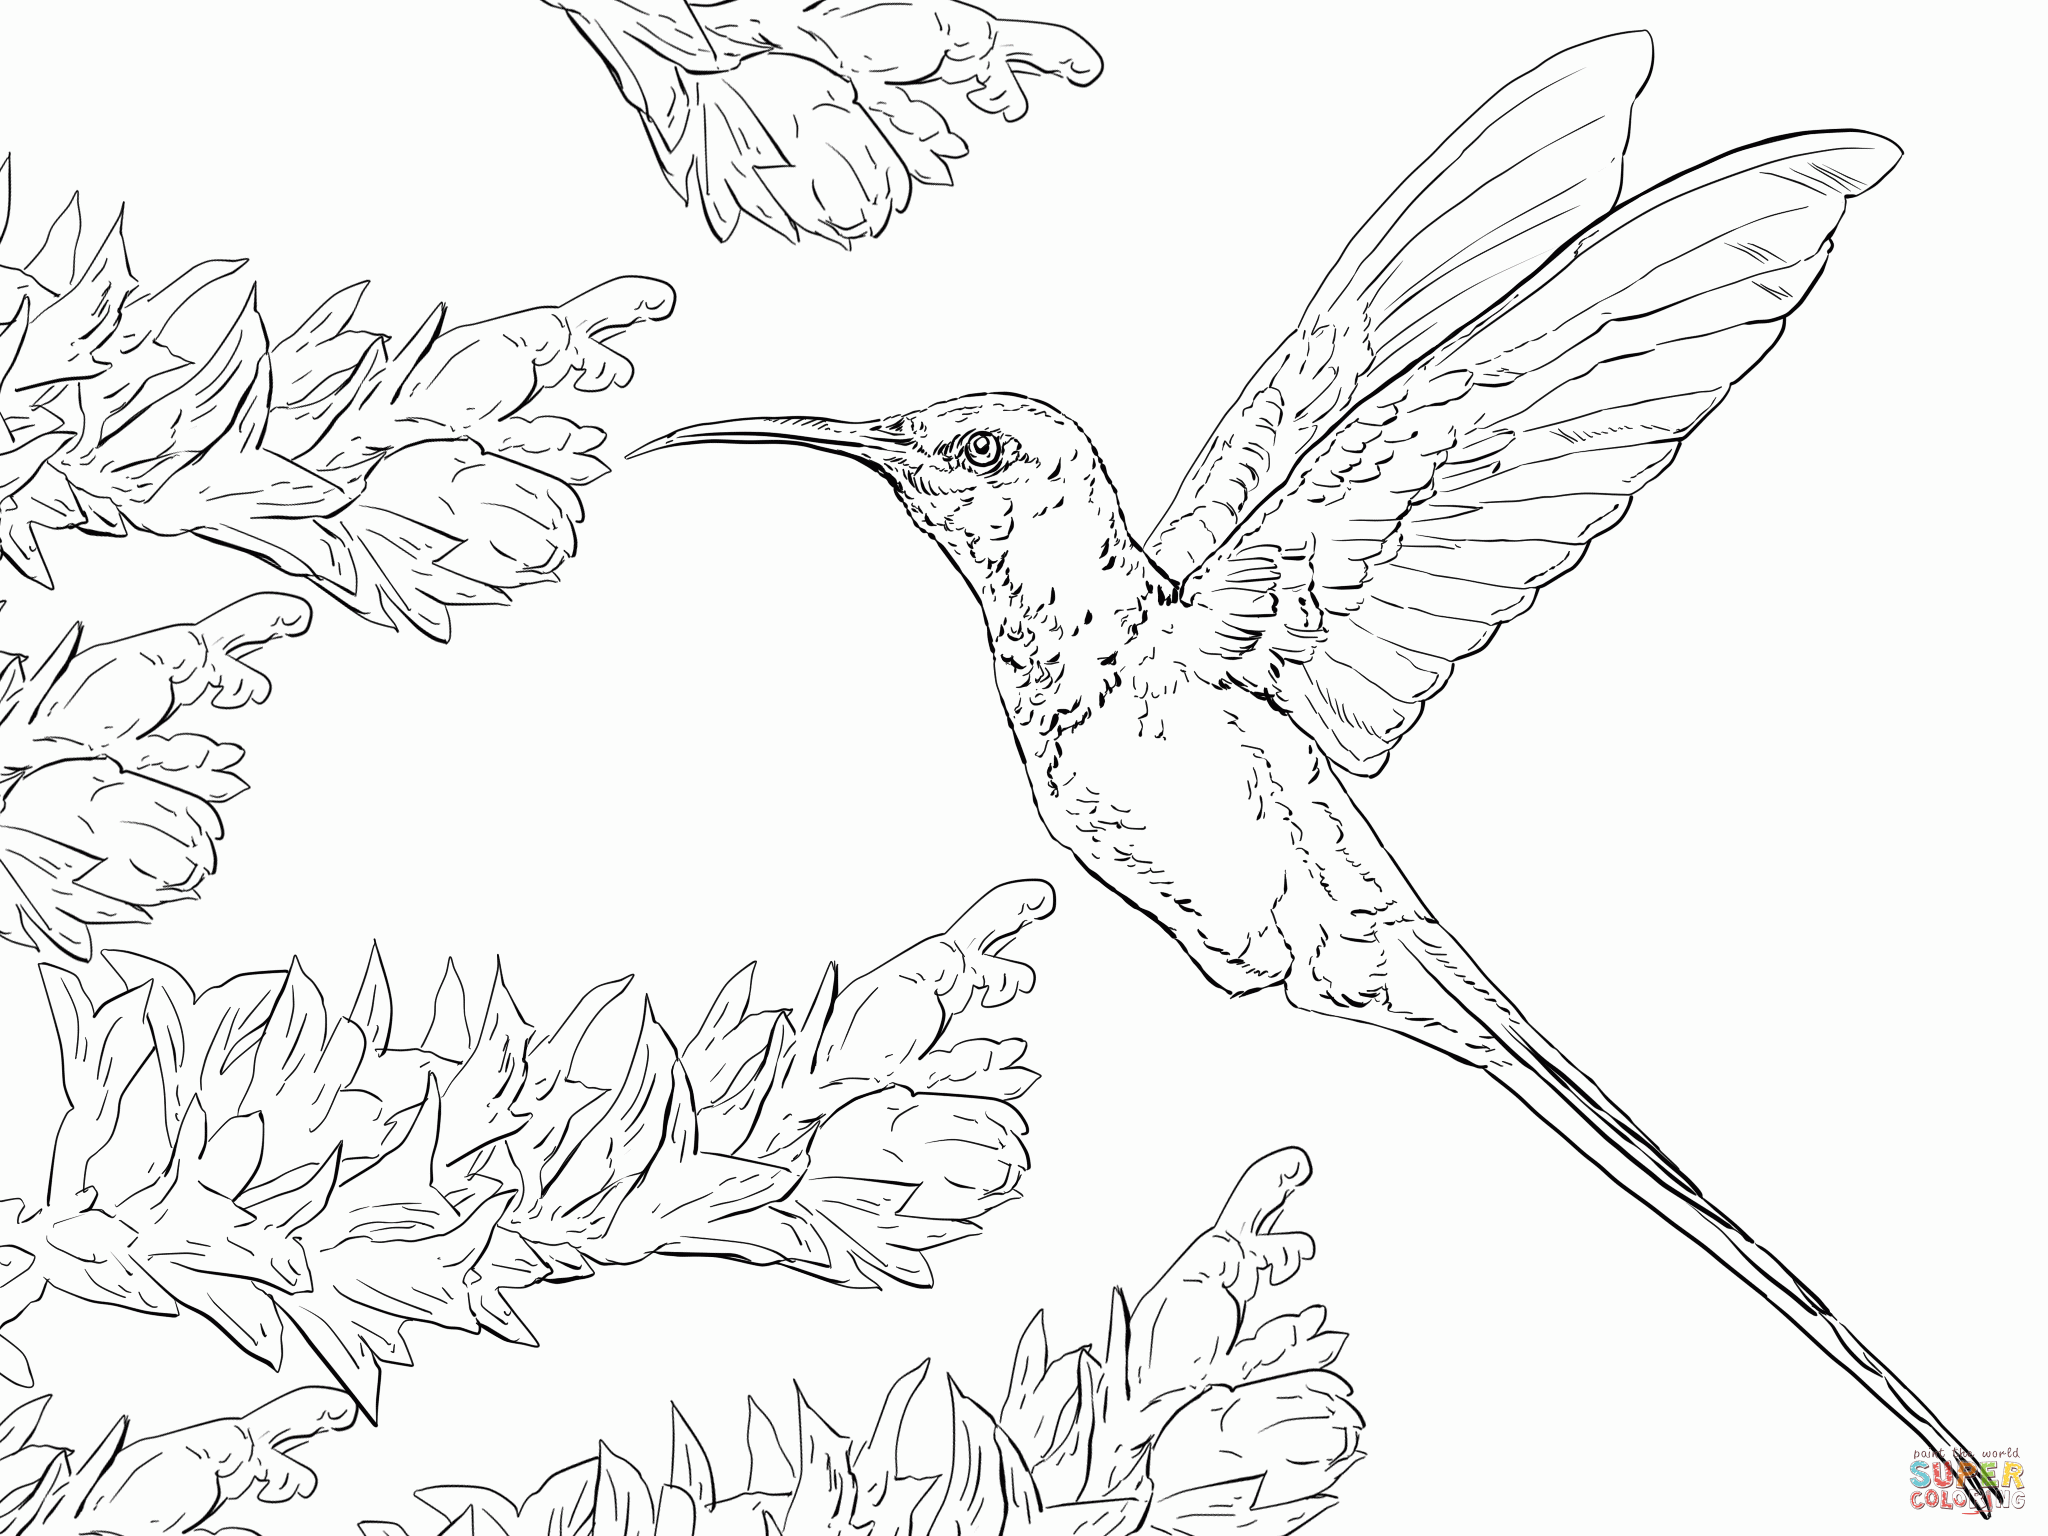 Hummingbird Coloring Page (19 Pictures) - Colorine.net | 2756